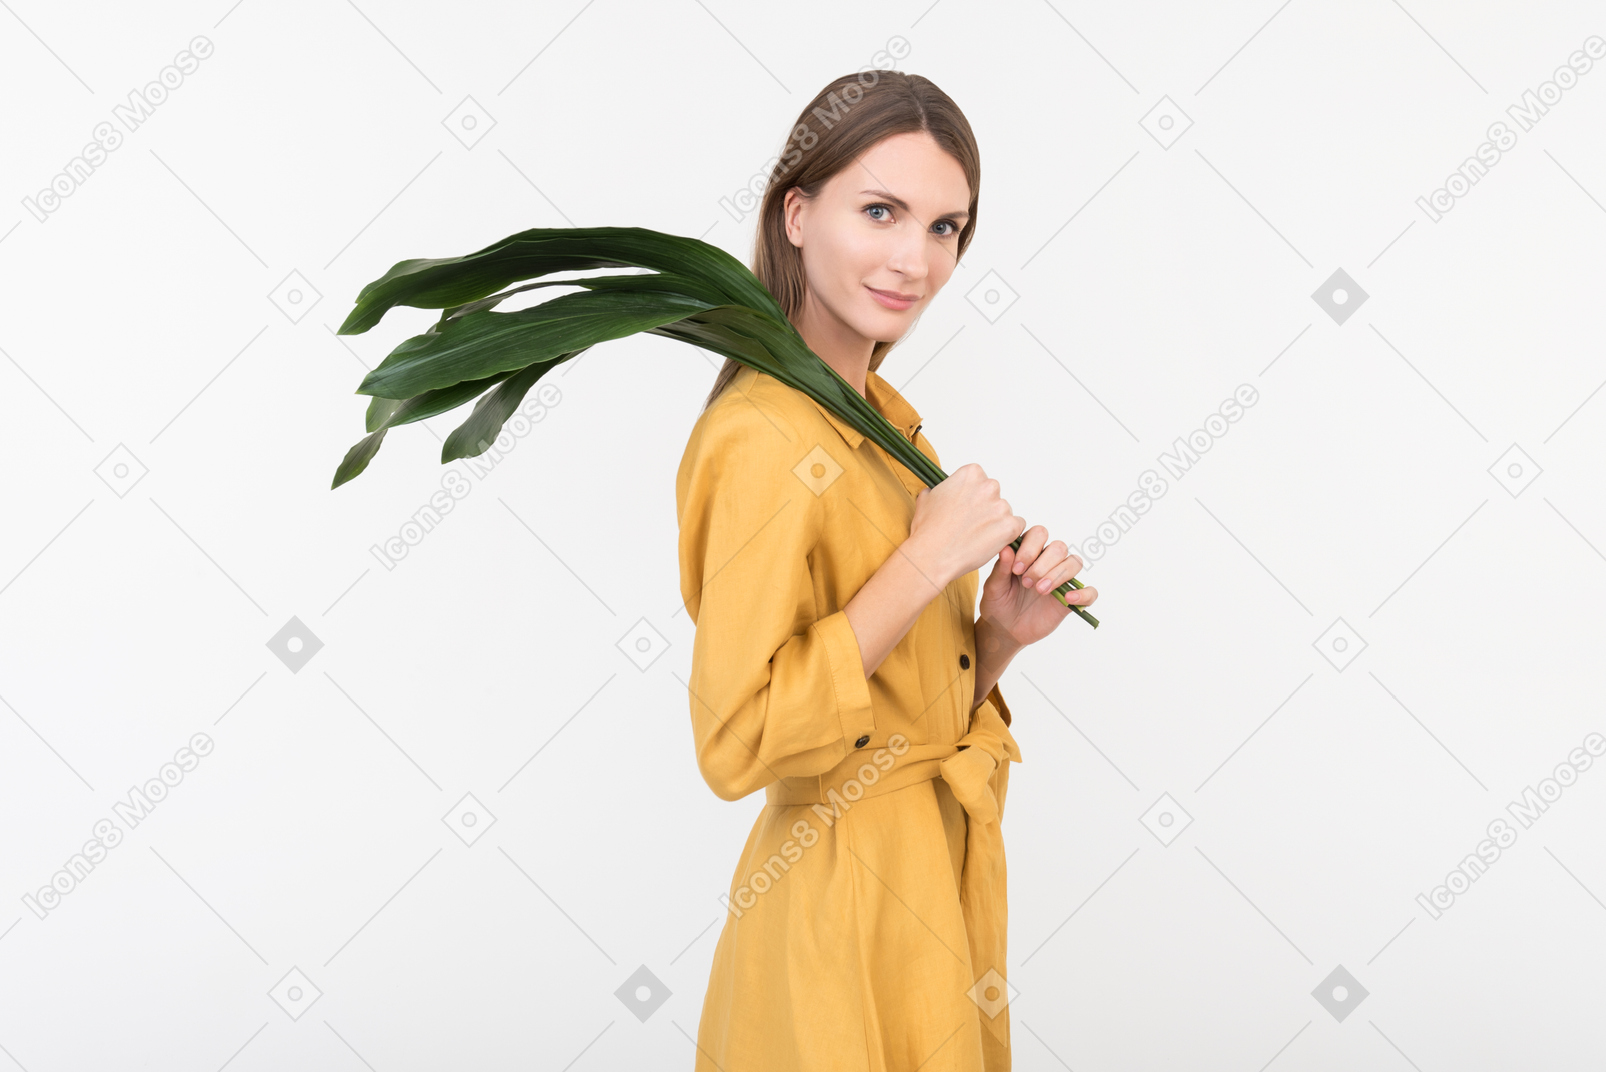 Young woman standing in profile and holding green branch on her shoulder